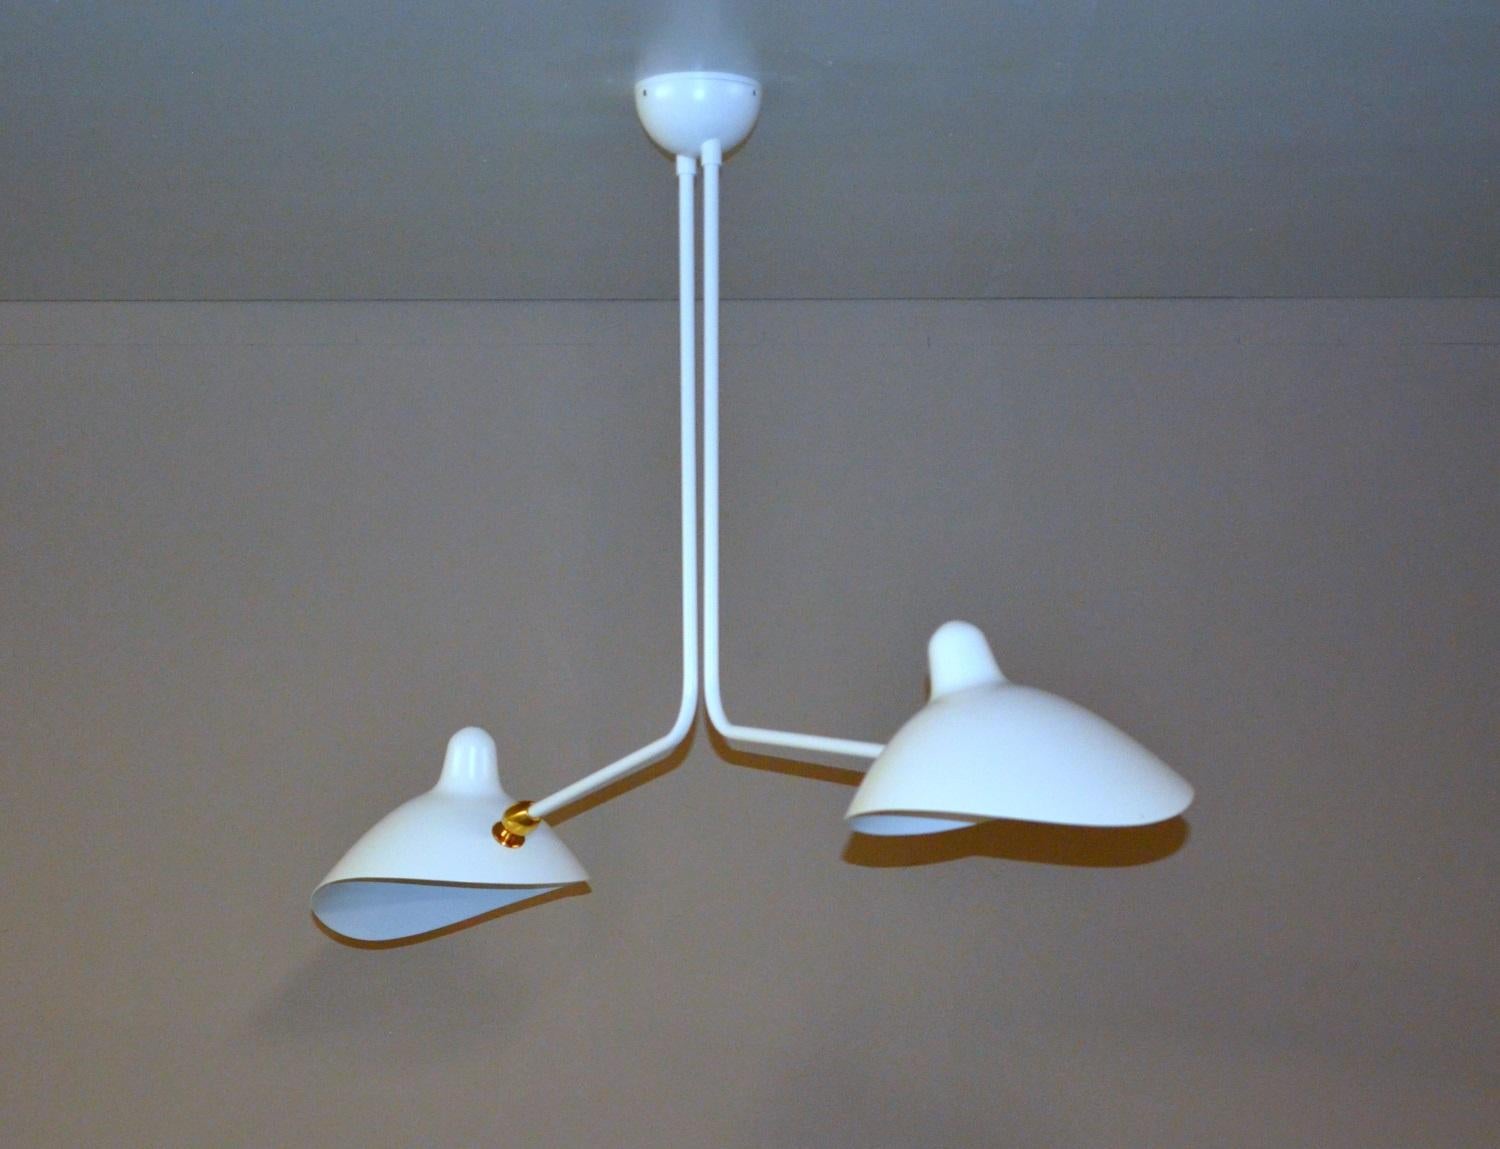 Simple and unique this ceiling lamp has two symmetrical curved arms which are fixed, with shades that can be rotated to any position. An elegant lamp with a small footprint that gives character to any room. 

Available in white or black.